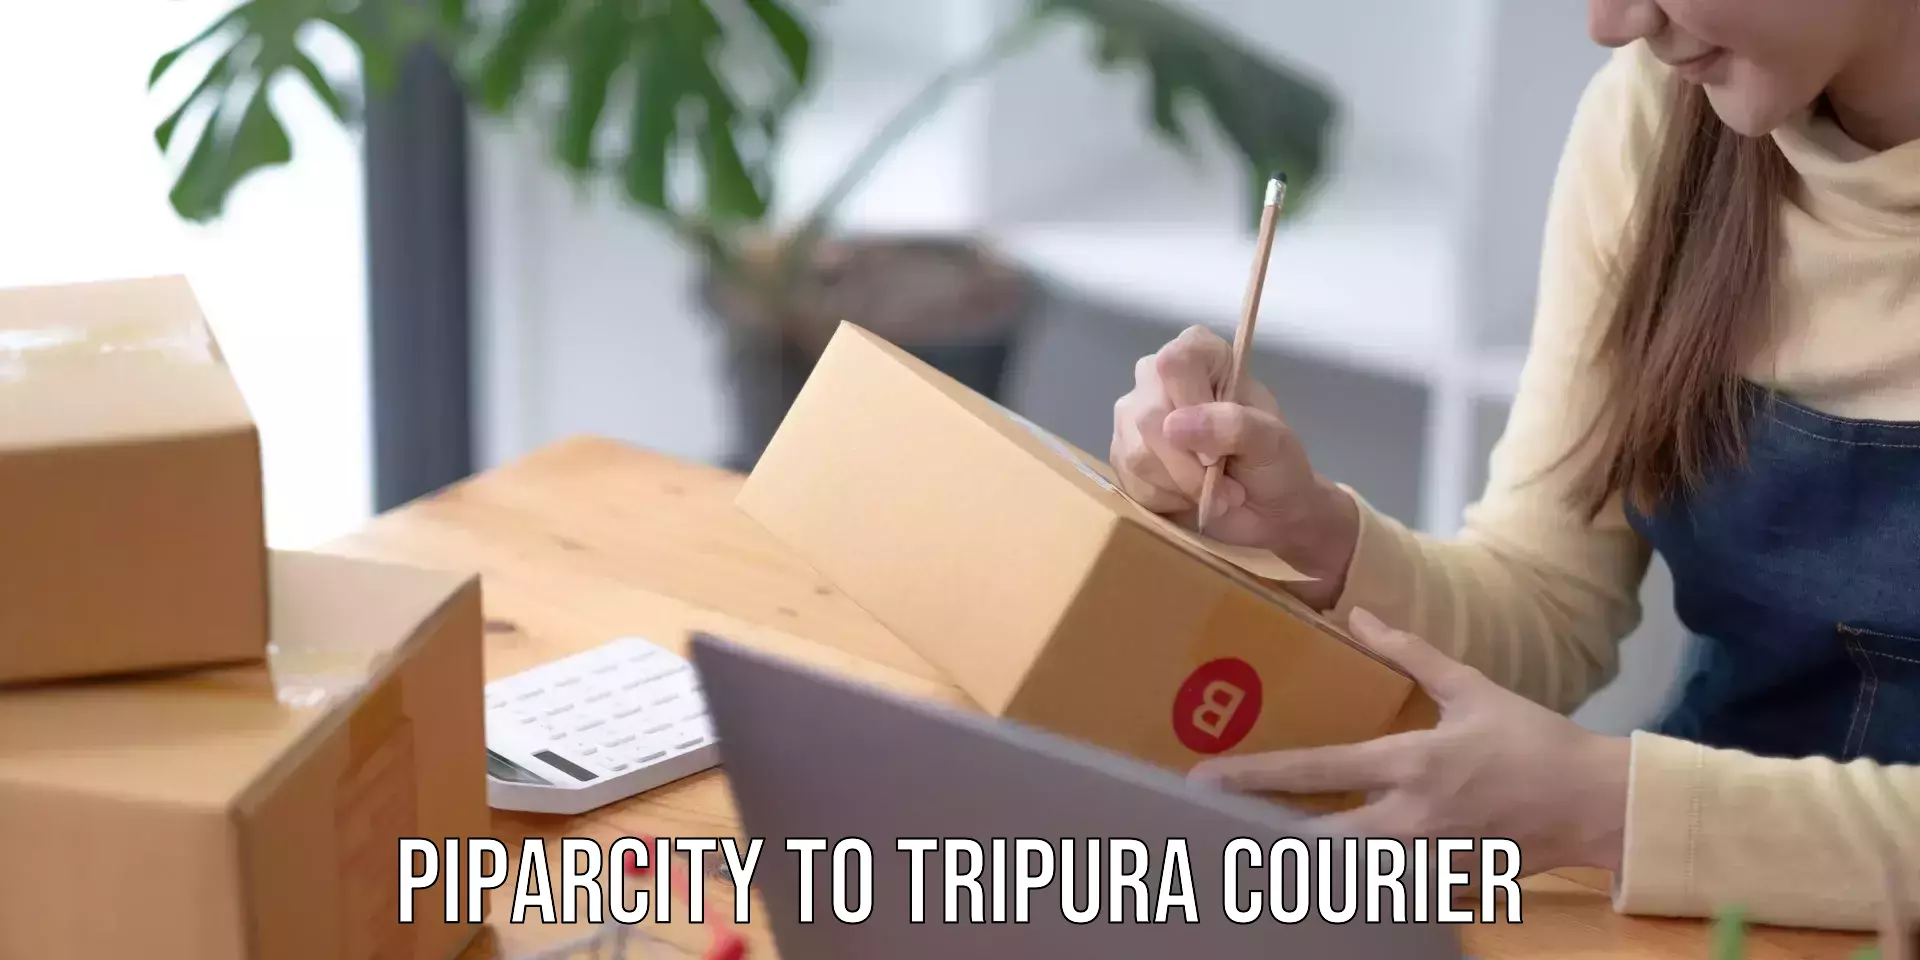 Multi-national courier services Piparcity to Udaipur Tripura